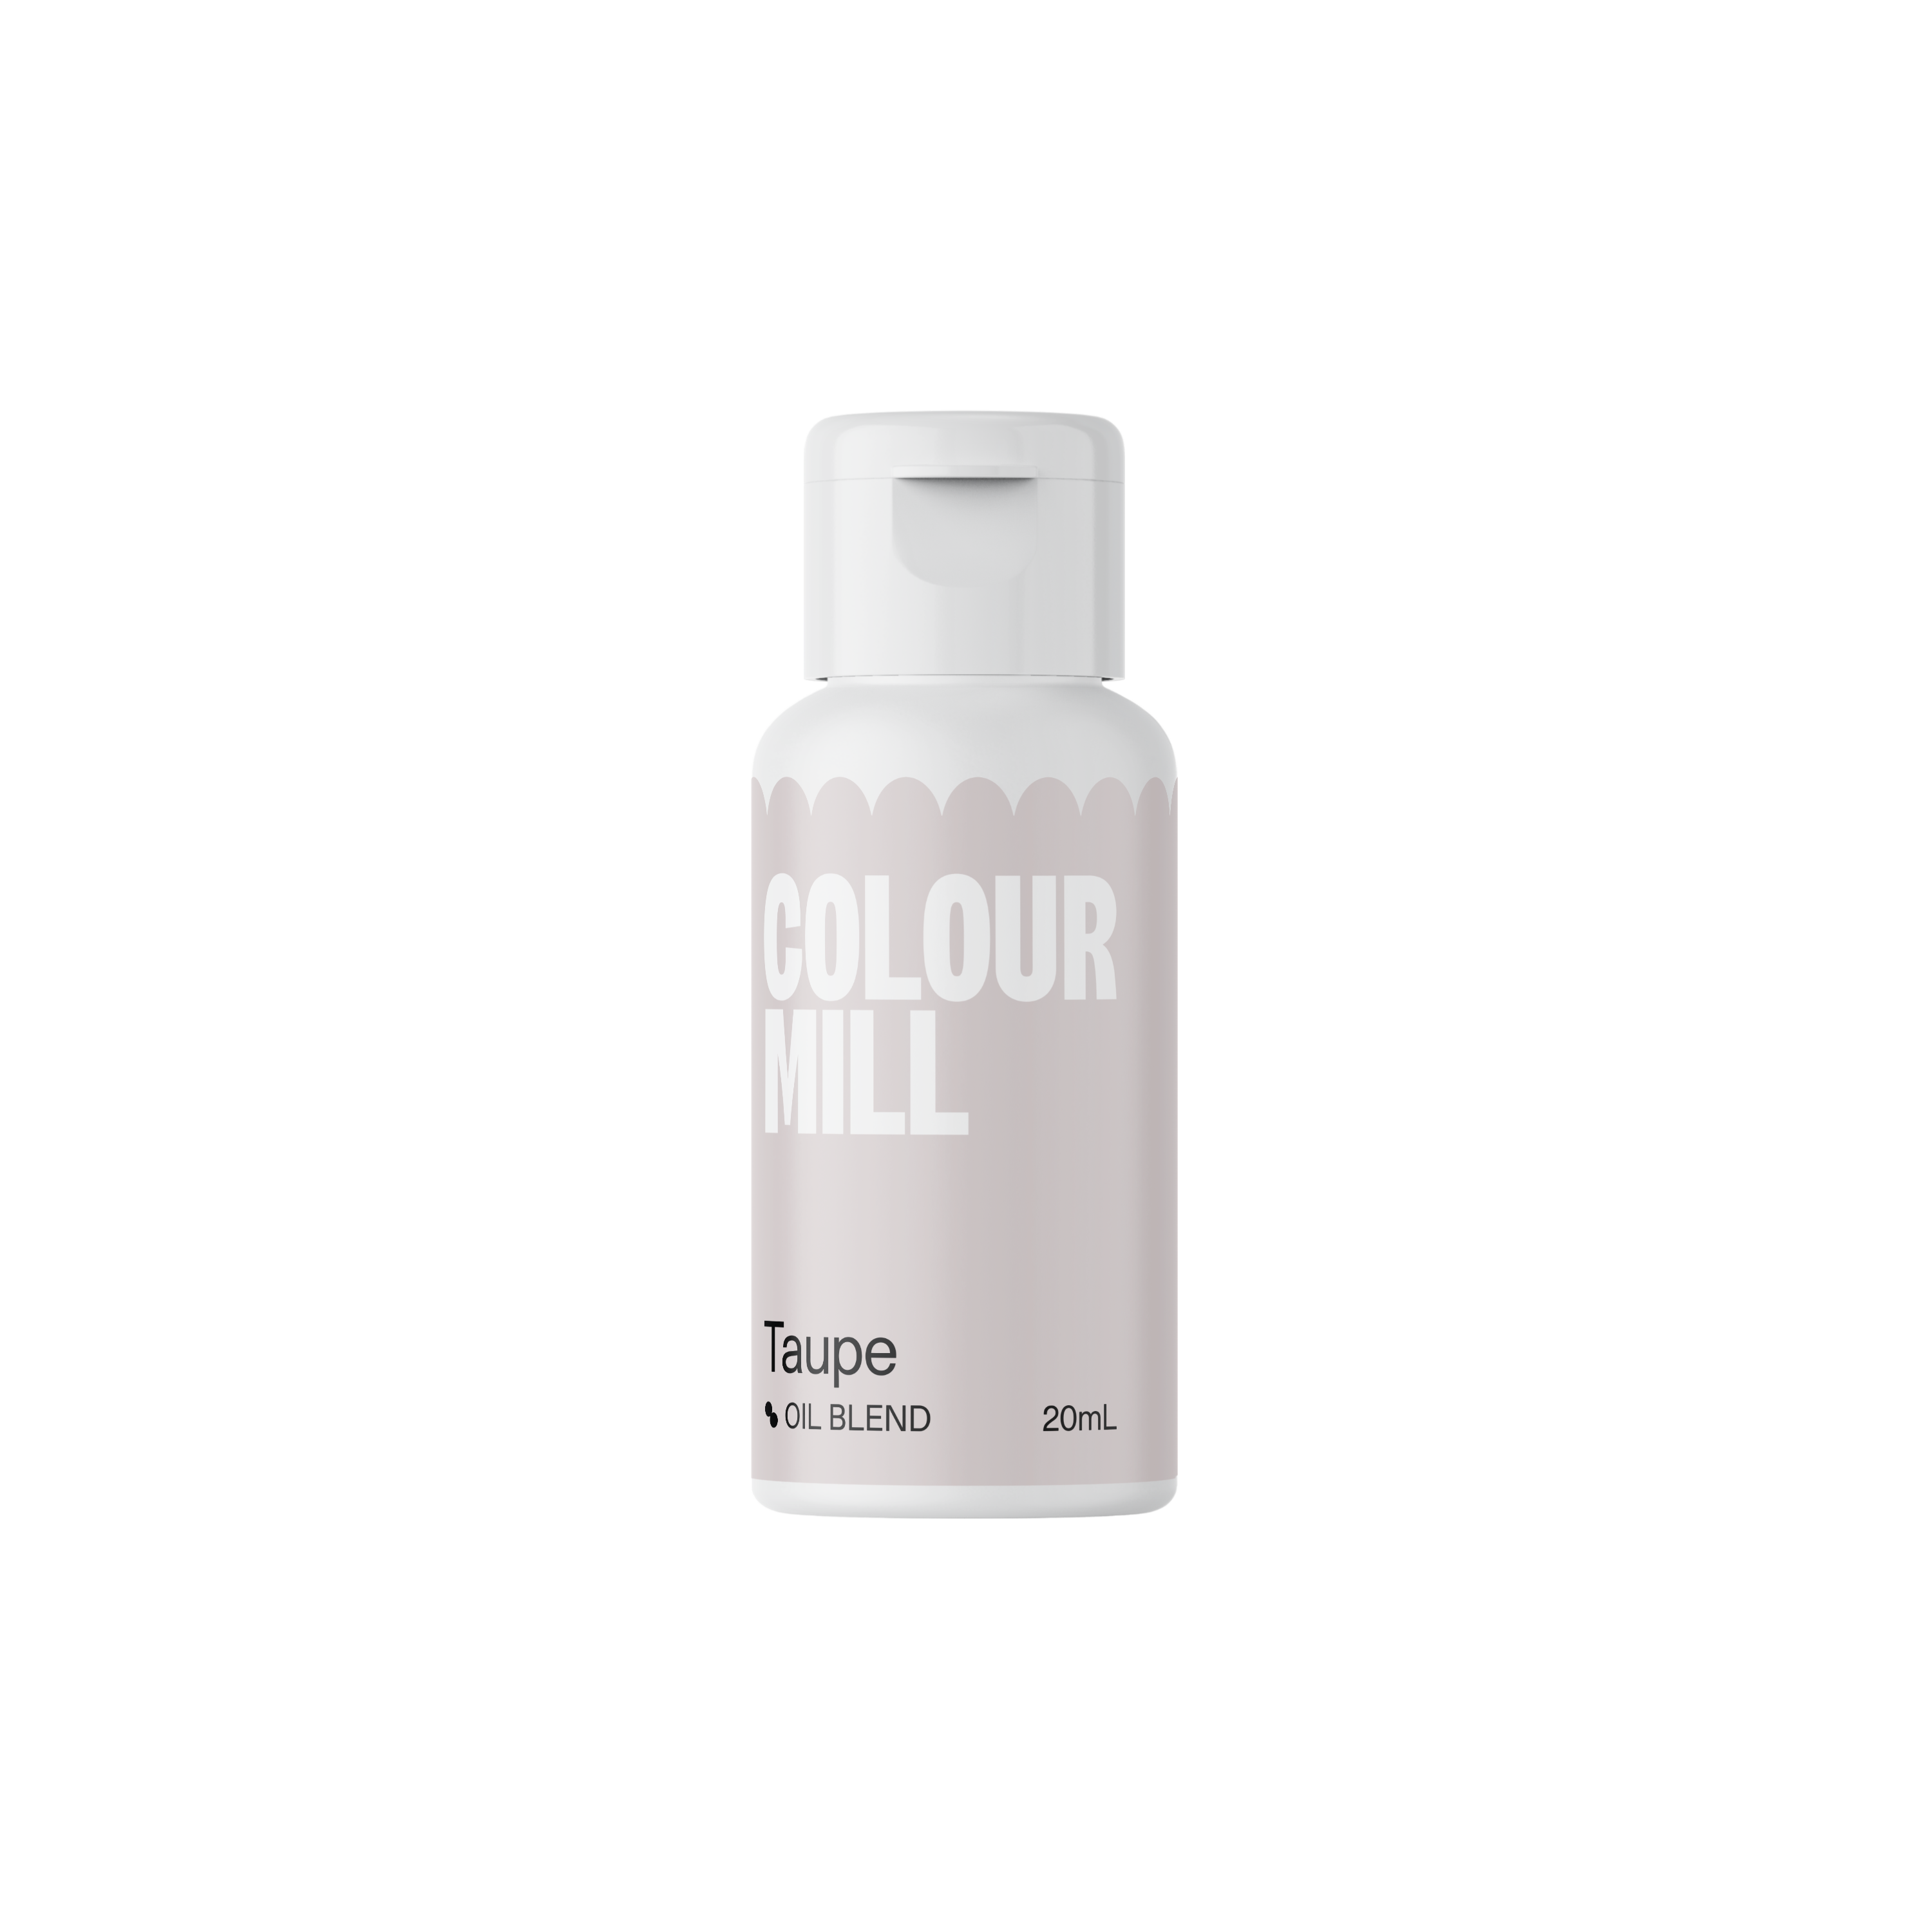 EU Taupe - Oil Blendproduct image